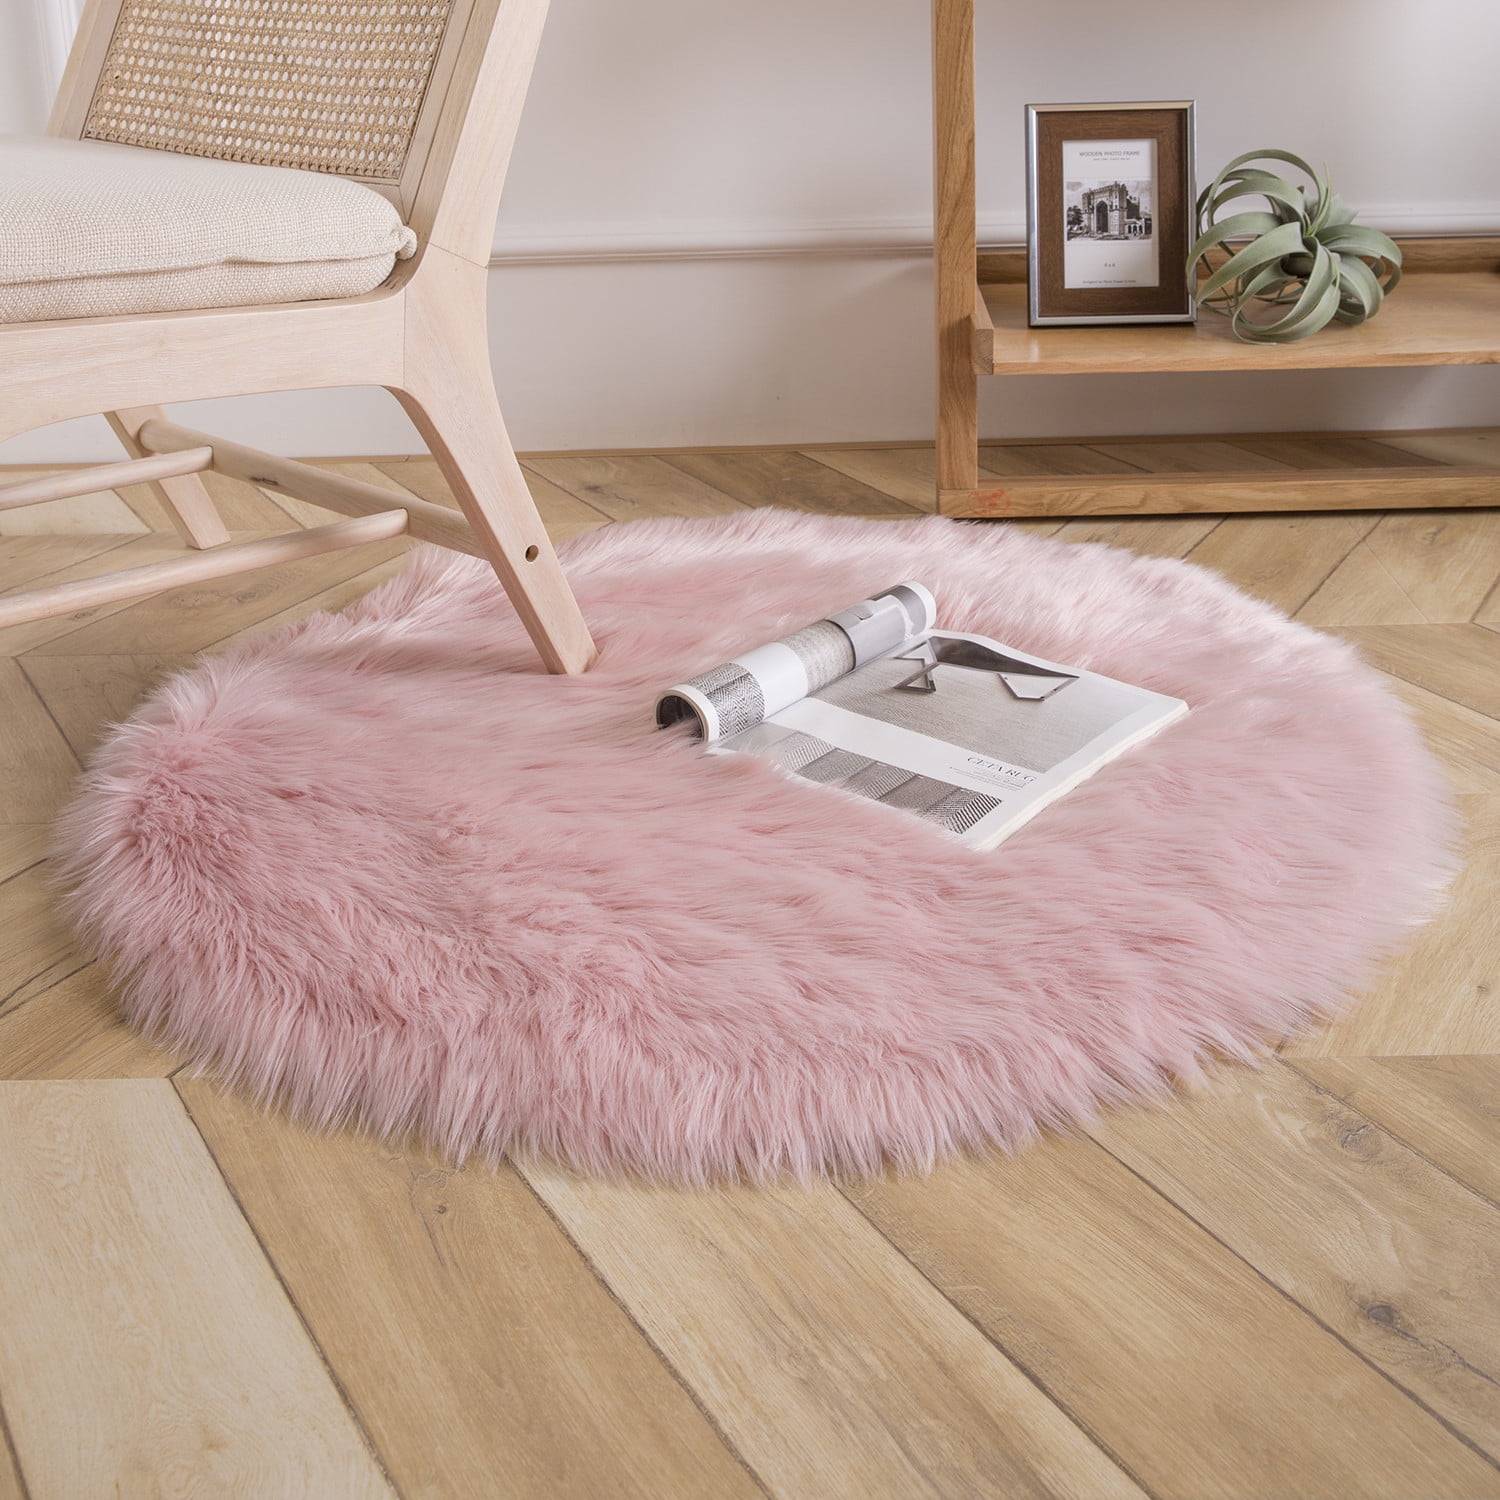 Phantoscope Deluxe Soft Faux Sheepskin Fur Series Decorative Indoor Area Rug 3 x 3 Feet Round, Pink, 1 Pack